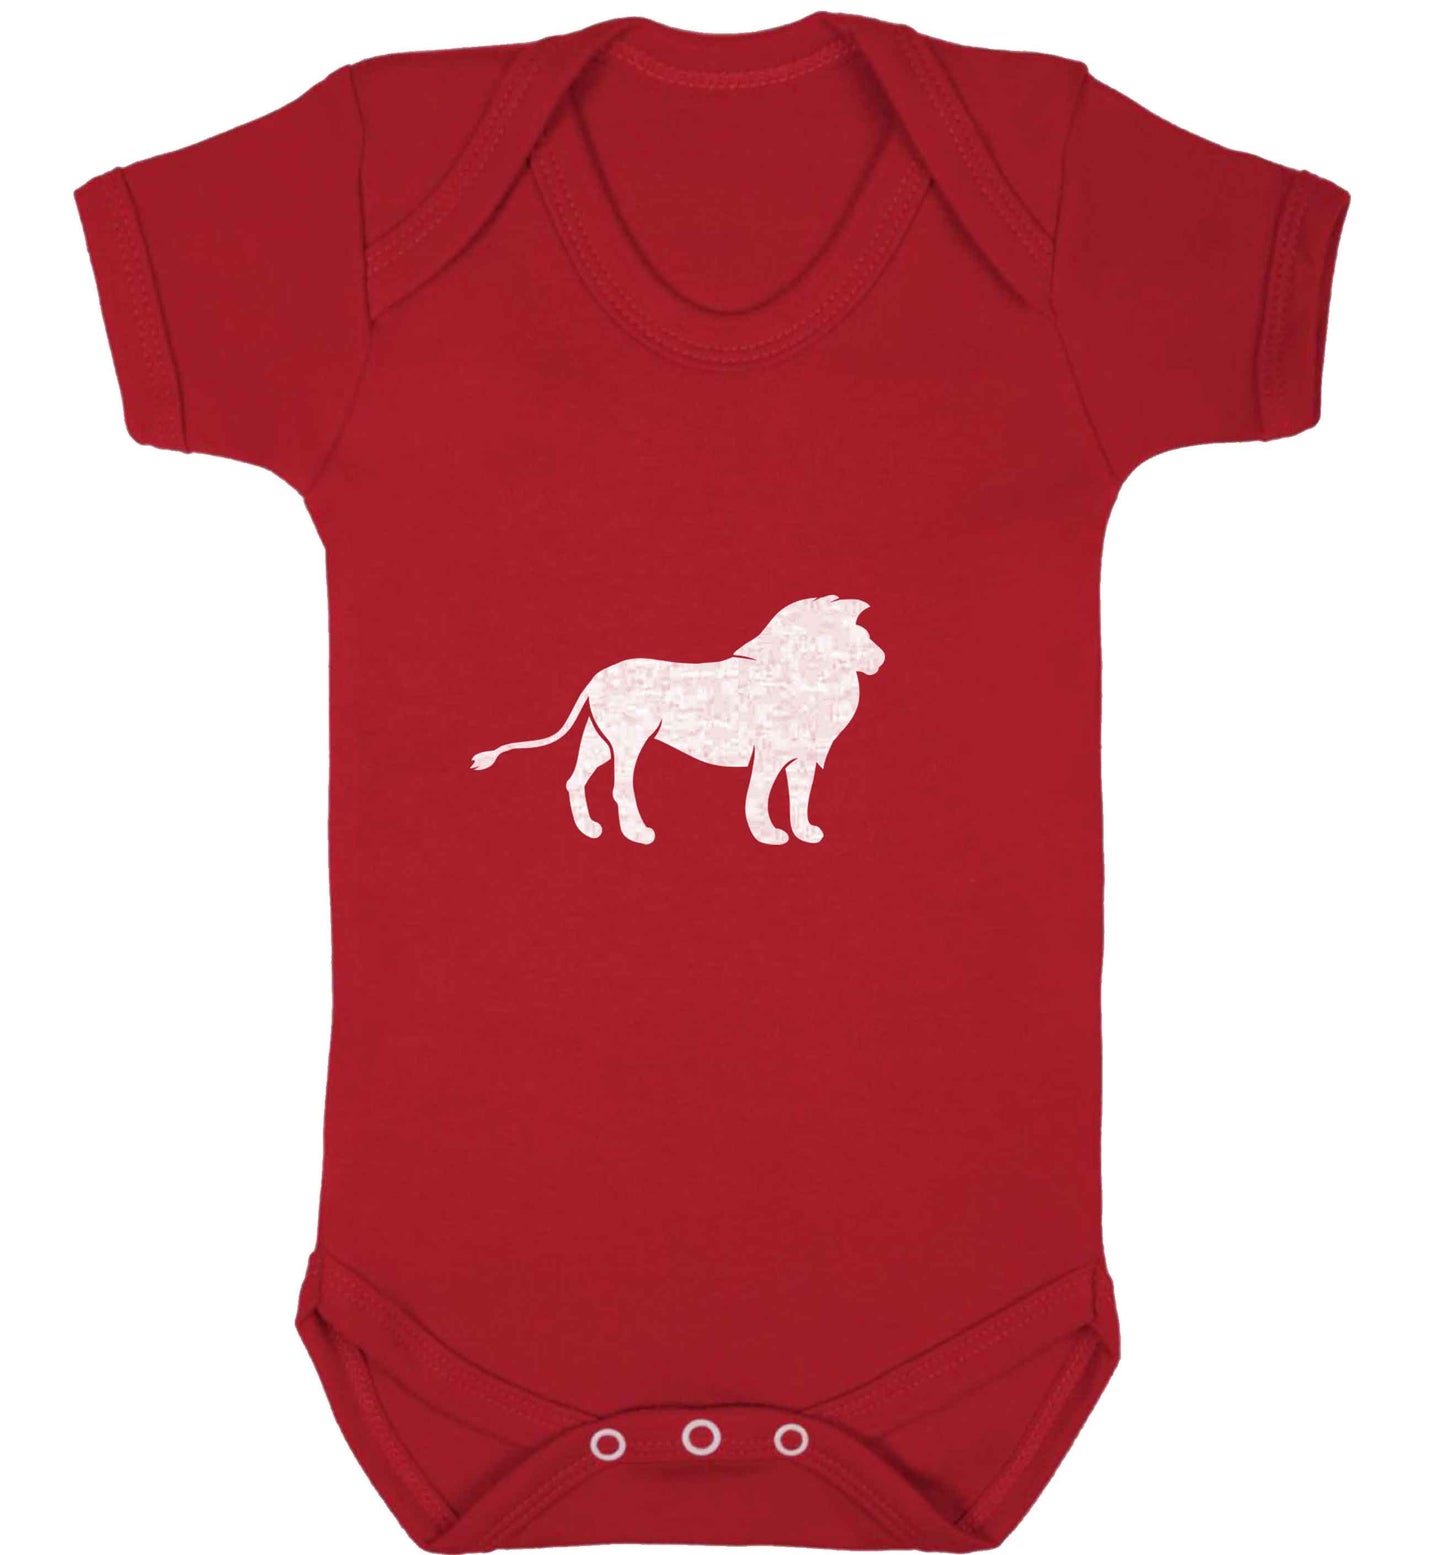 Gold lion baby vest red 18-24 months